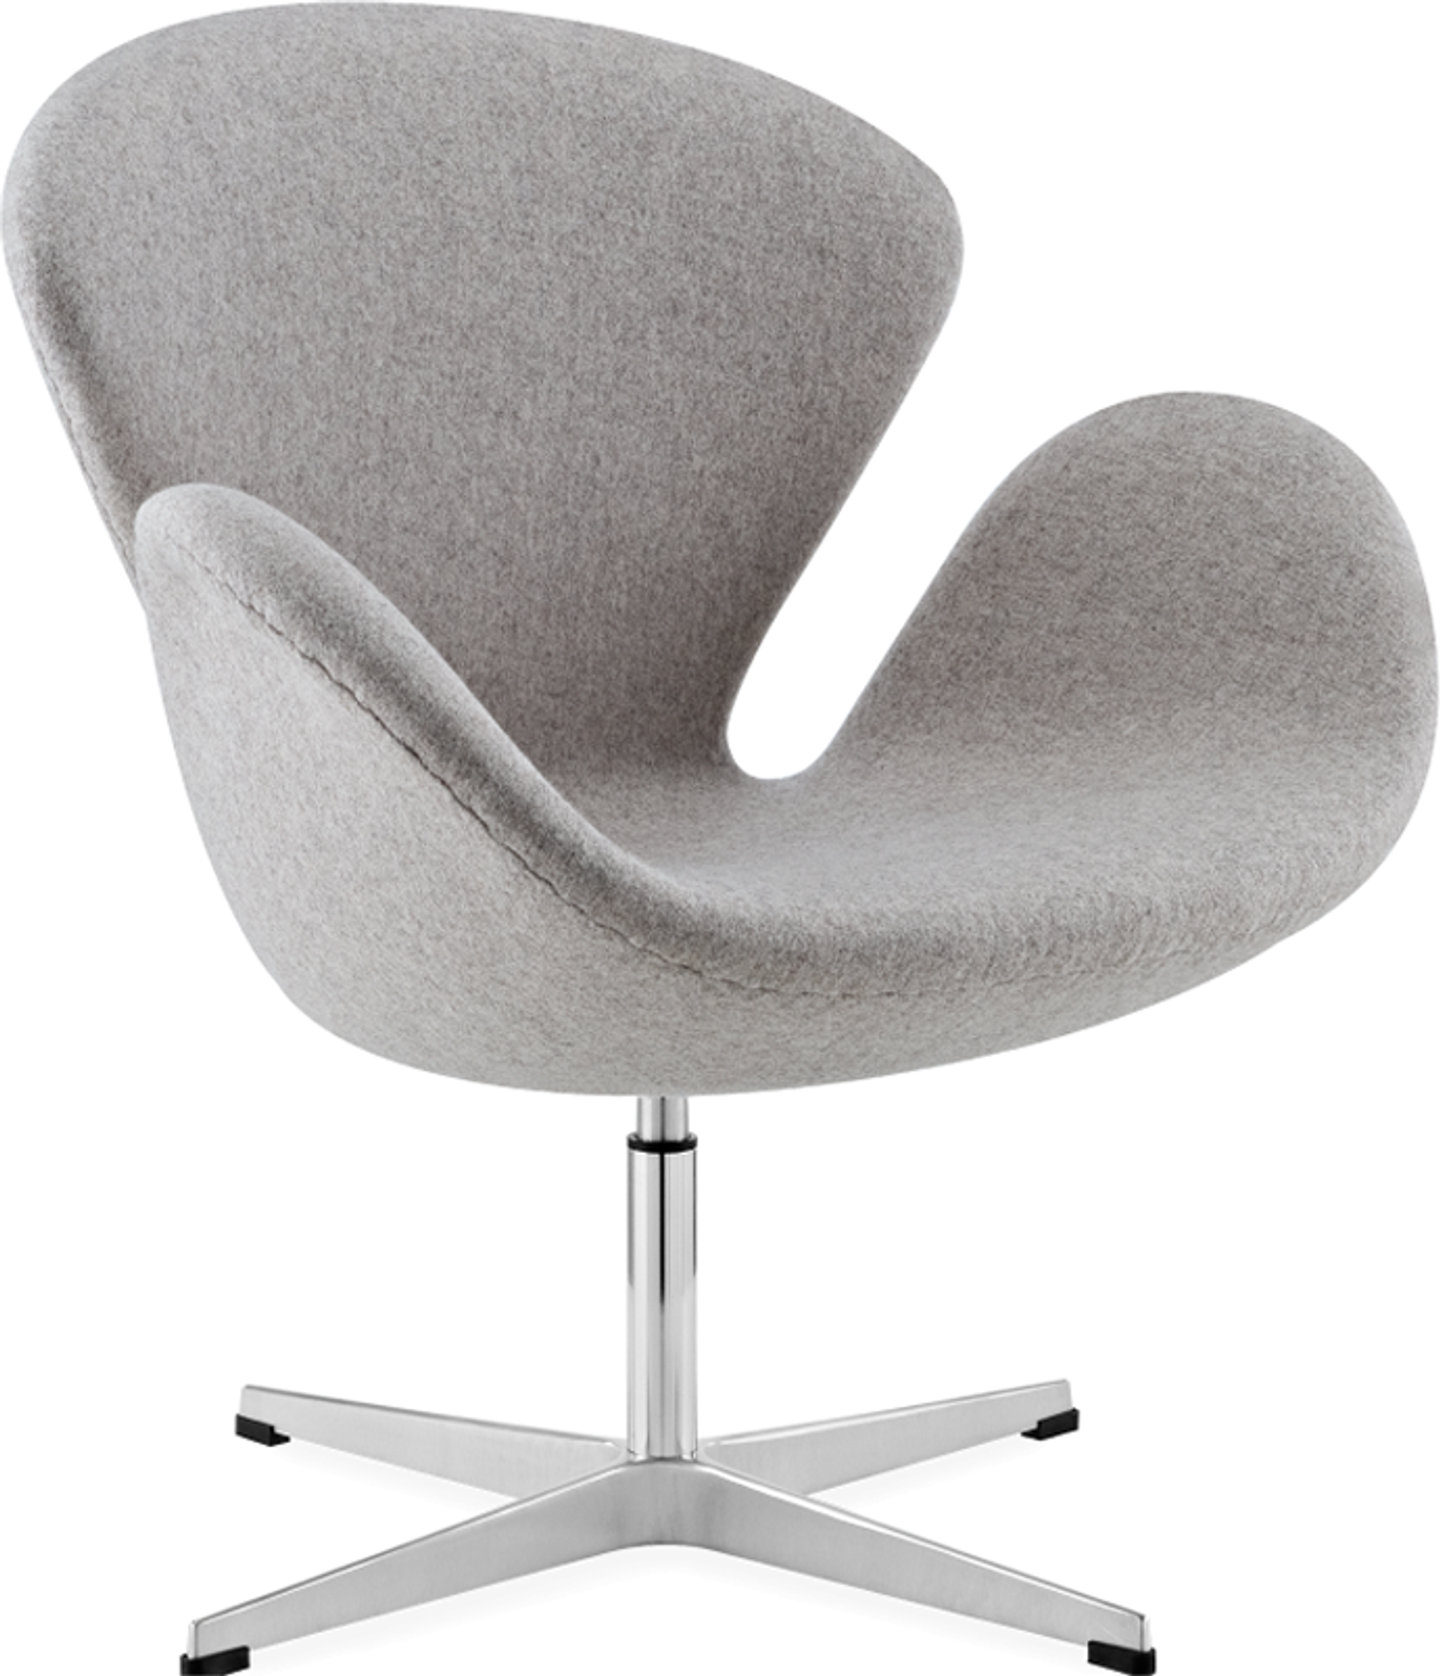 La Silla del Cisne Wool/Without piping/Light Pebble Grey image.